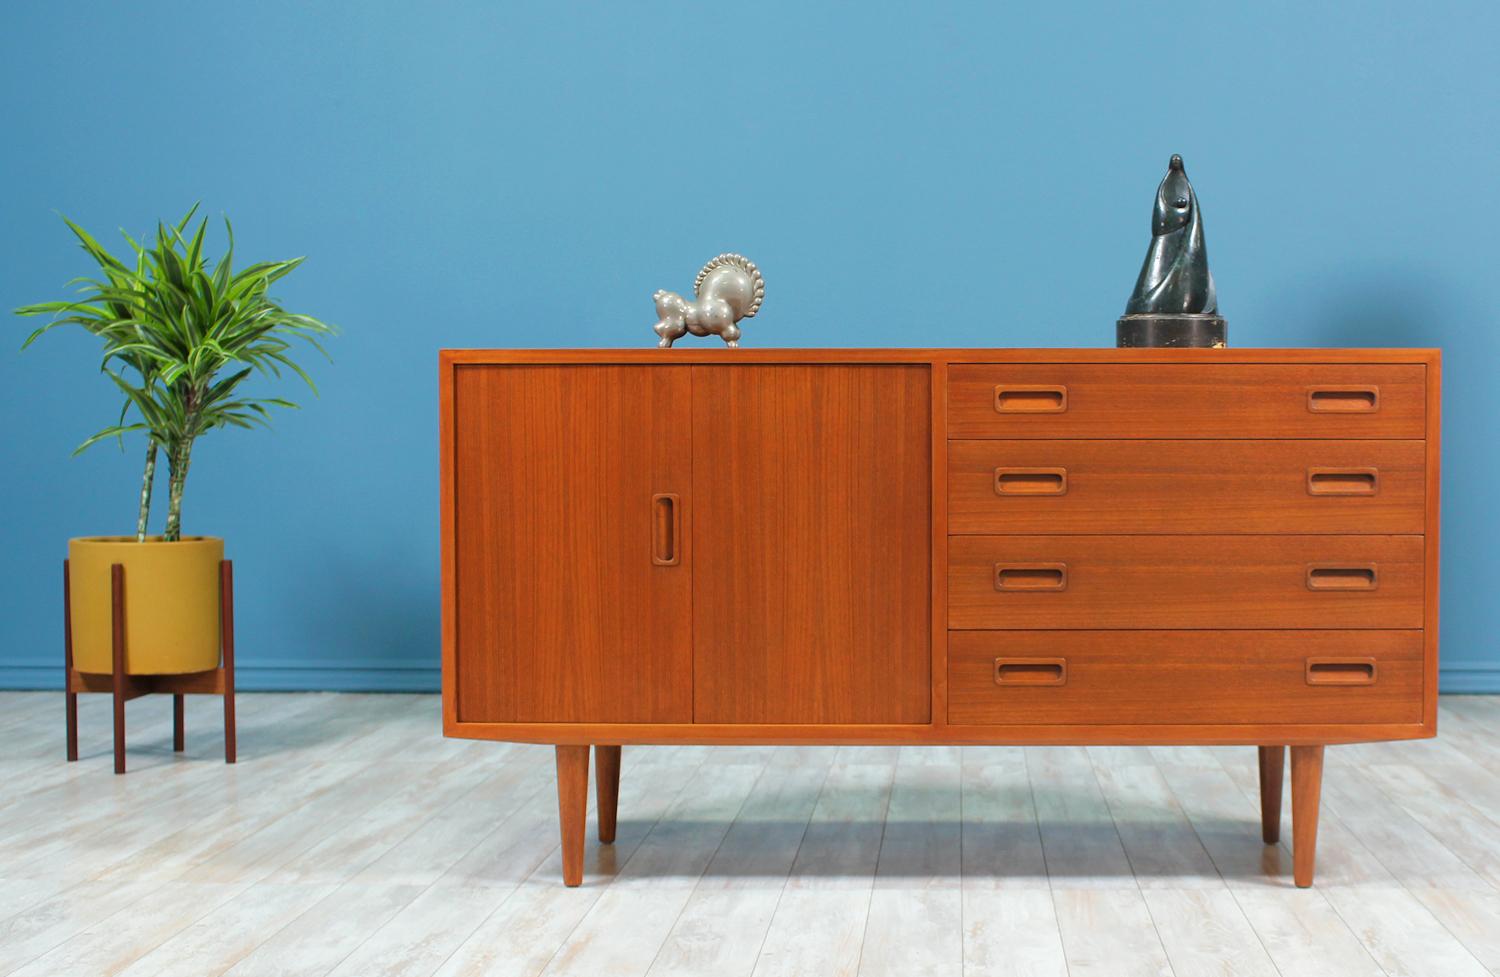 Designer: Carlo Jensen
Manufacturer: Hundevad & Co.
Country of origin: Denmark
Date of manufacture: 1960-1969
Materials: Teak wood, birch wood
Period style: Danish modern

Condition: Excellent
Extra conditions: Newly refinished
Dimensions: